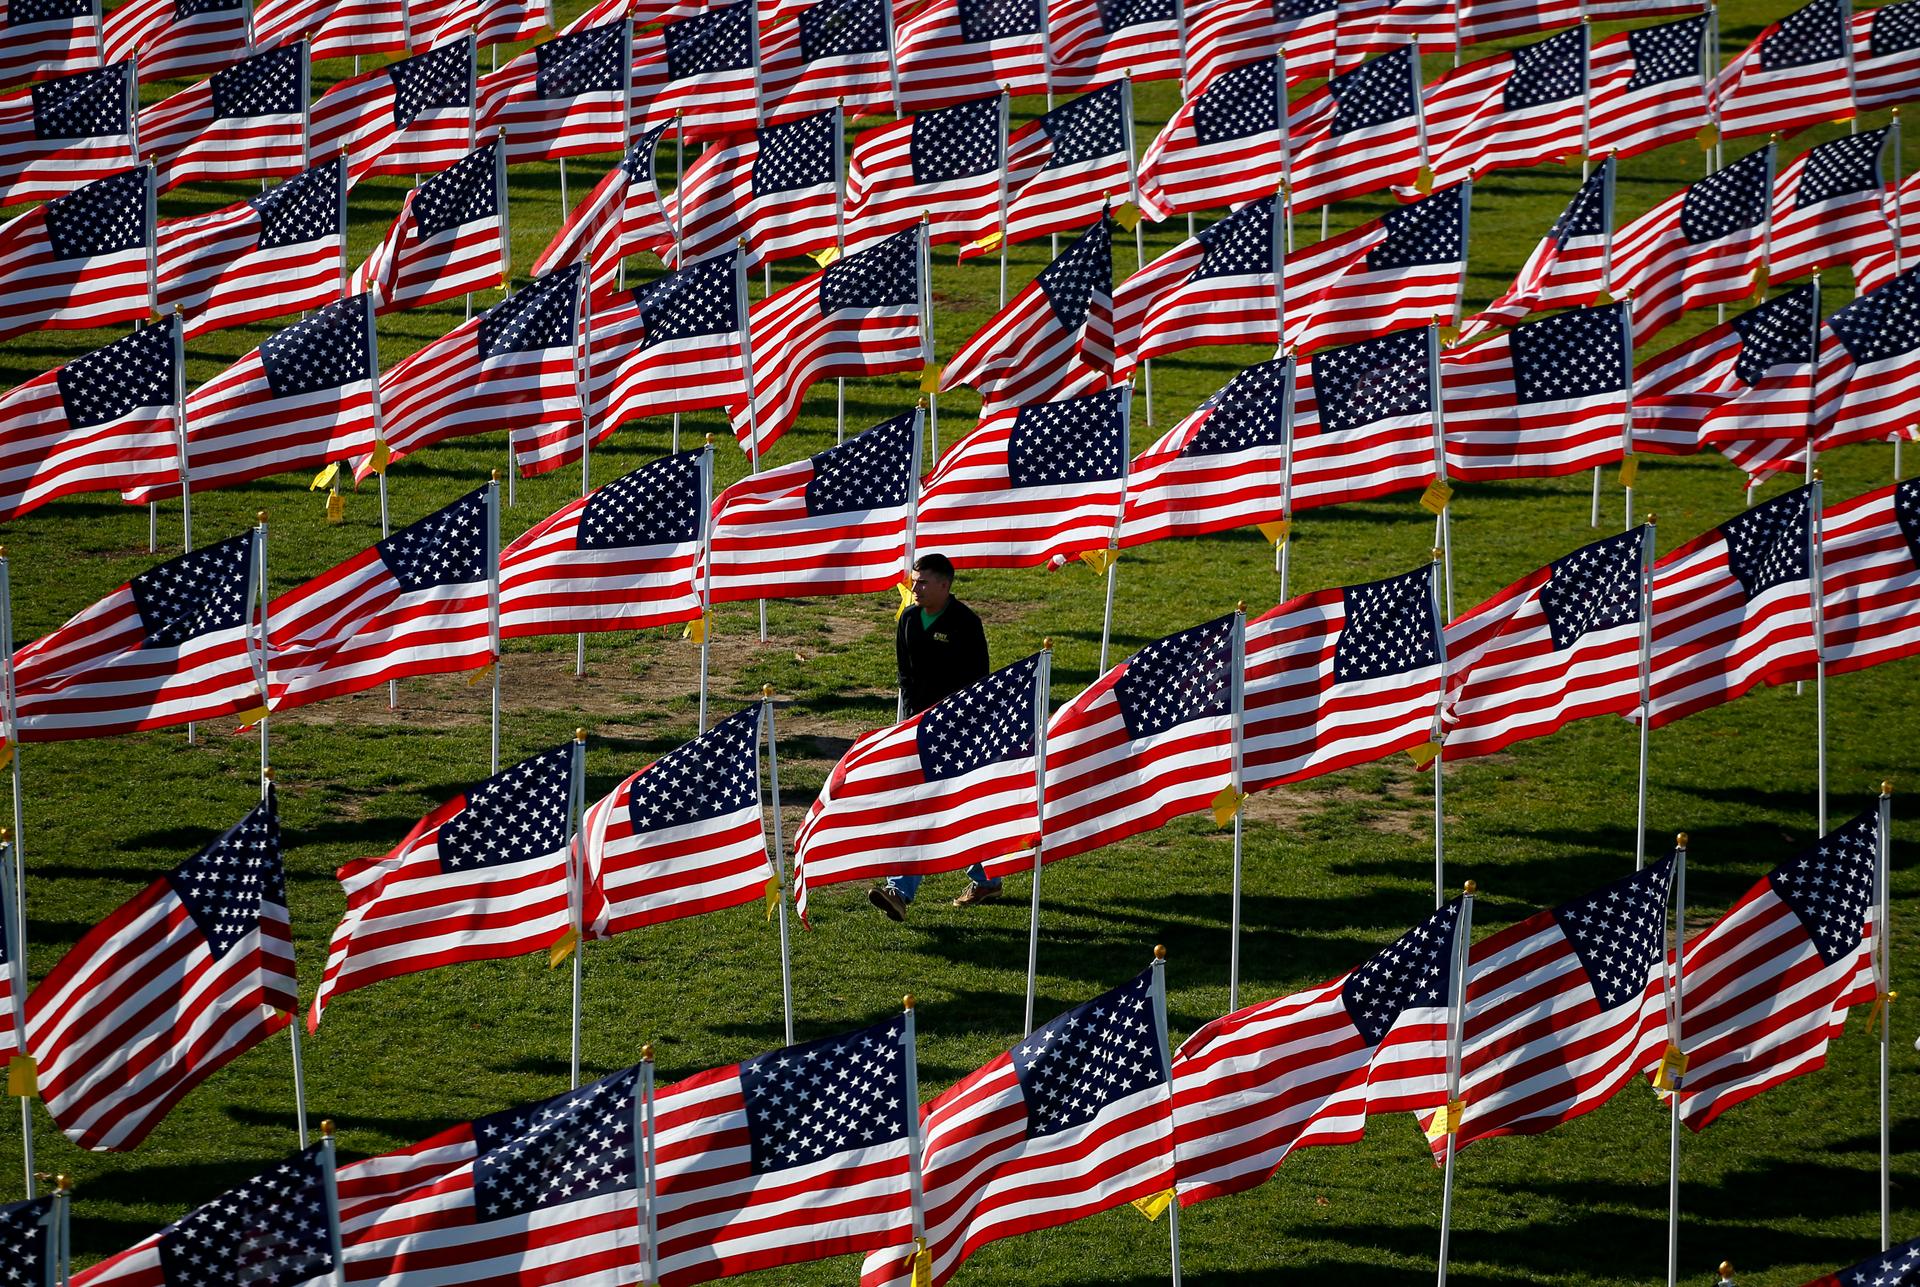 US Army serviceman Jason Richmond, of Batavia, Illinois, walks through some of the two thousand and thirteen United States flags that are part of the Aurora Healing Fields, to honor veterans.